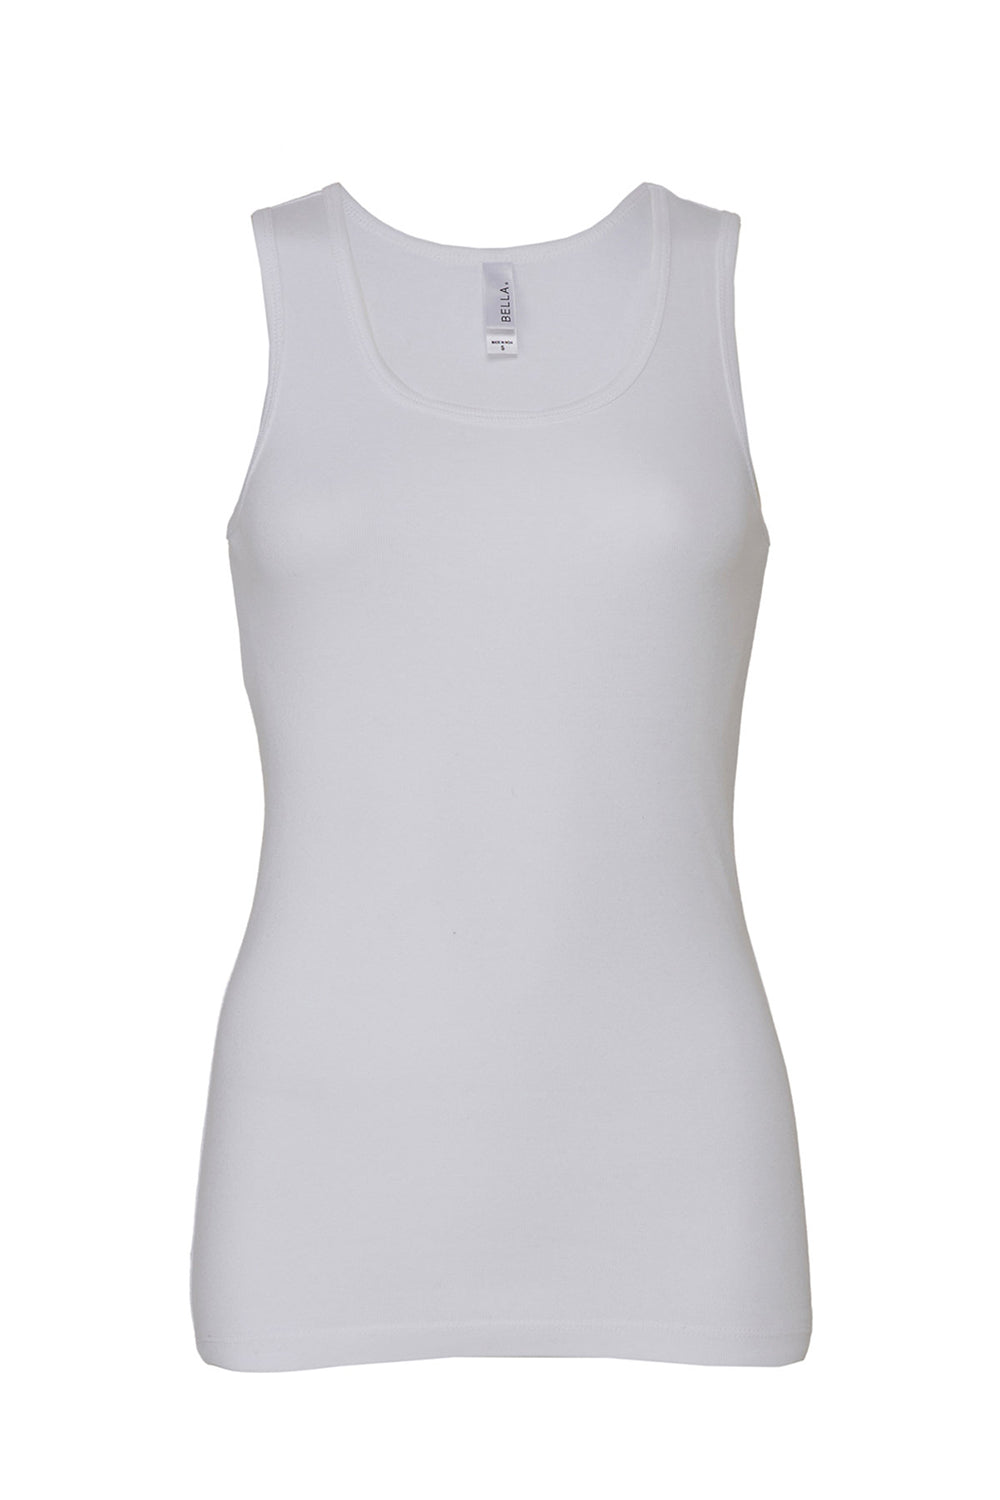 Bella + Canvas 1080 Womens Tank Top White Flat Front